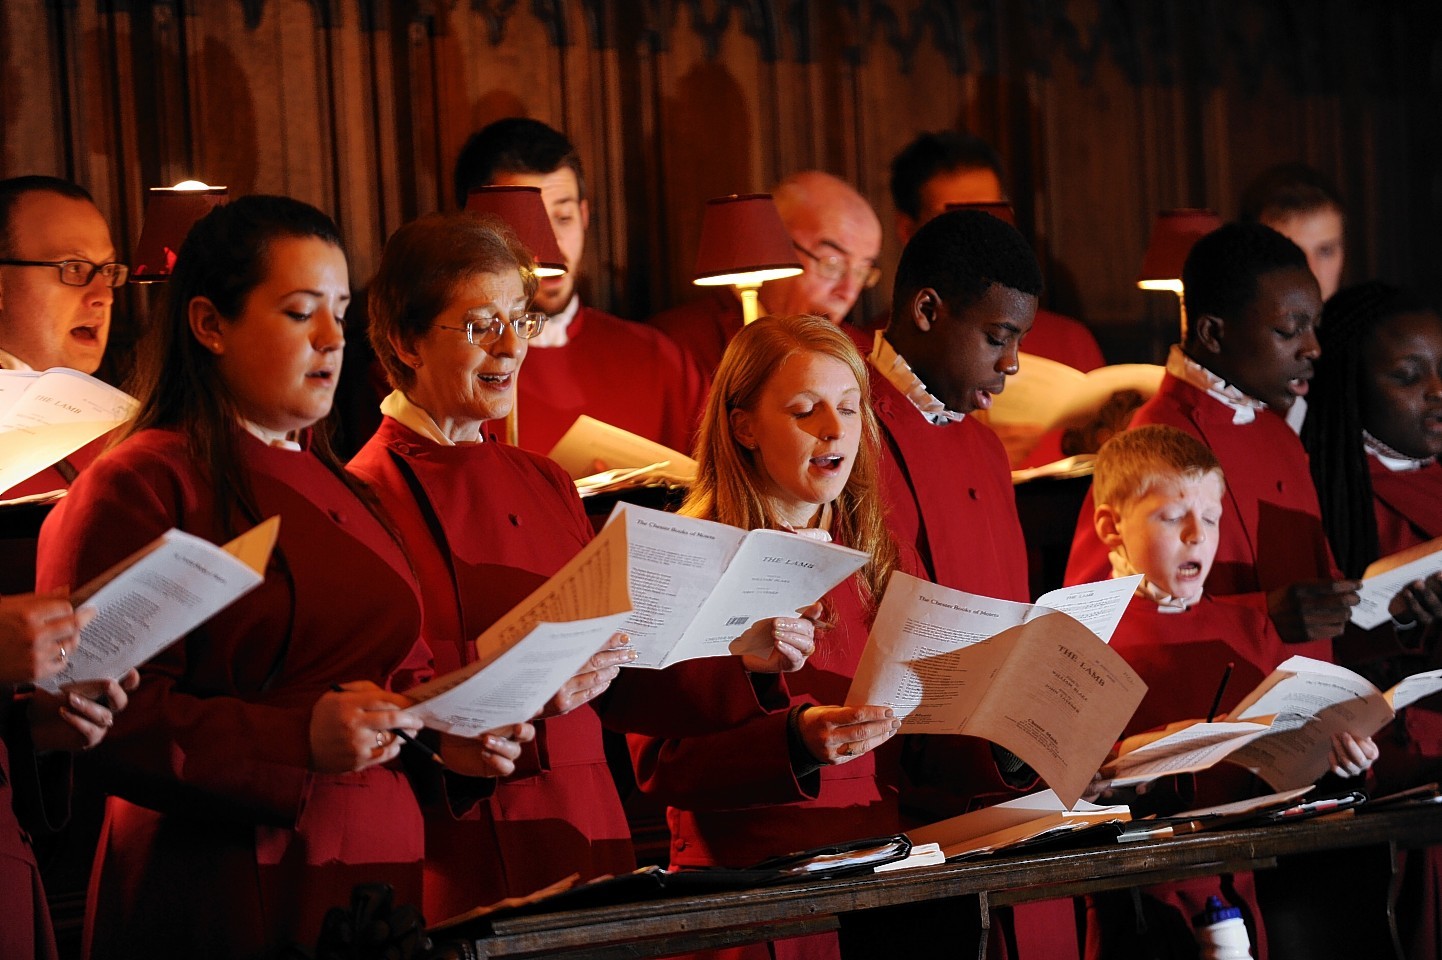 St Andrew's Cathedral, on King Street, hosted the annual Festival of Nine Lessons and Carols, a service featuring a mix of popular and historic Christian hymns. Credit: Kenny Elrick.